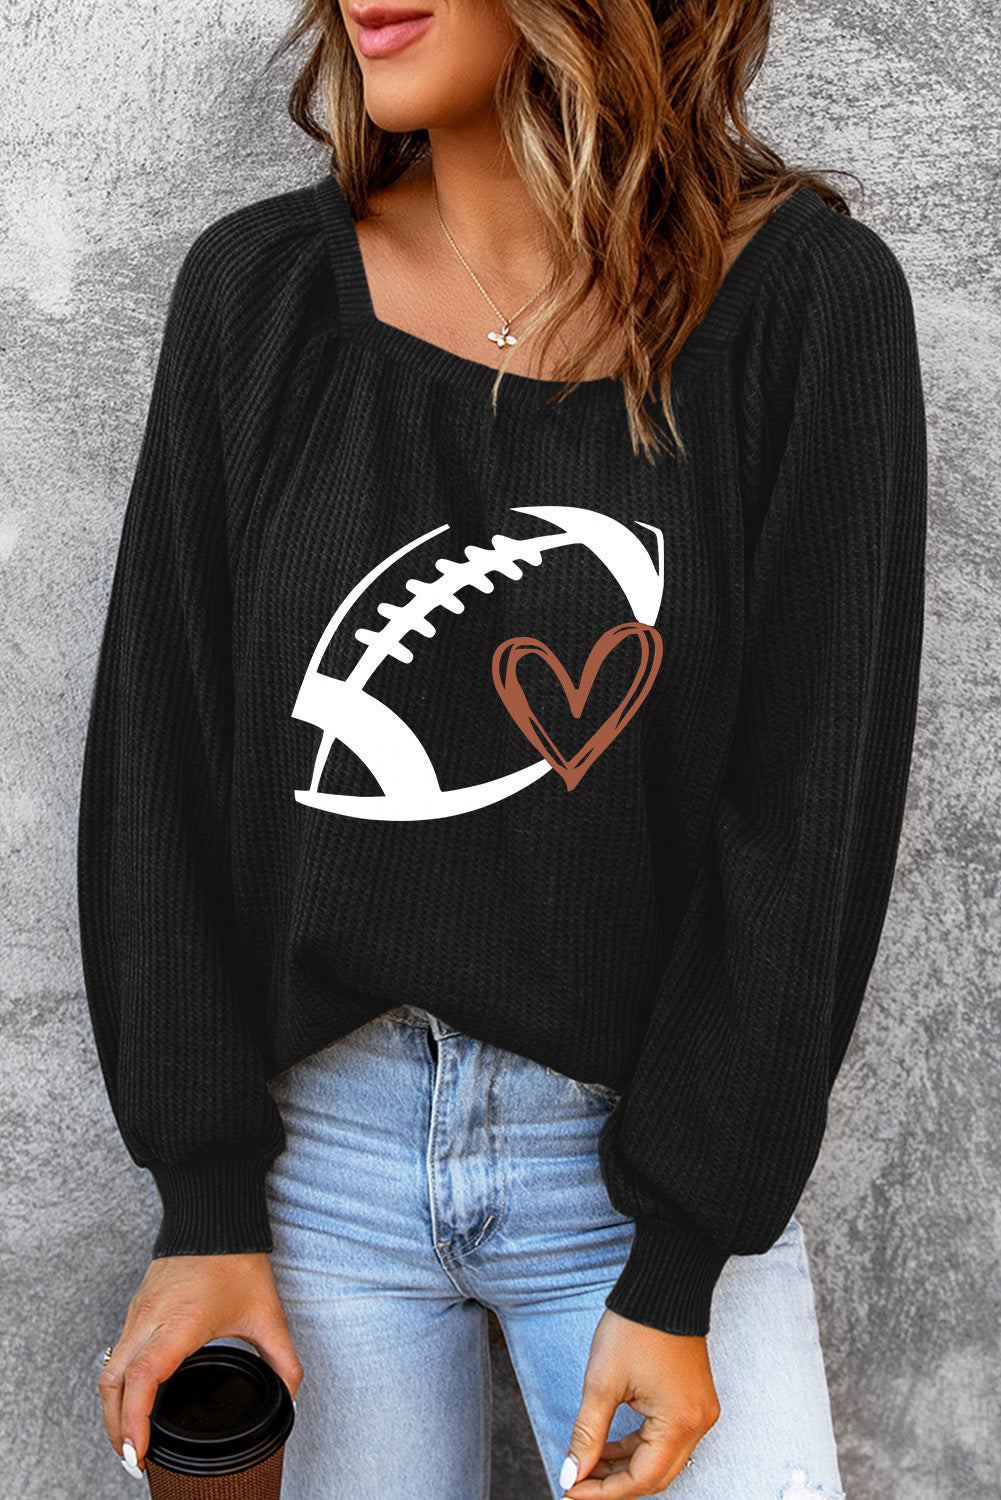 Football Graphic Ribbed Top - Women’s Clothing & Accessories - Shirts & Tops - 4 - 2024